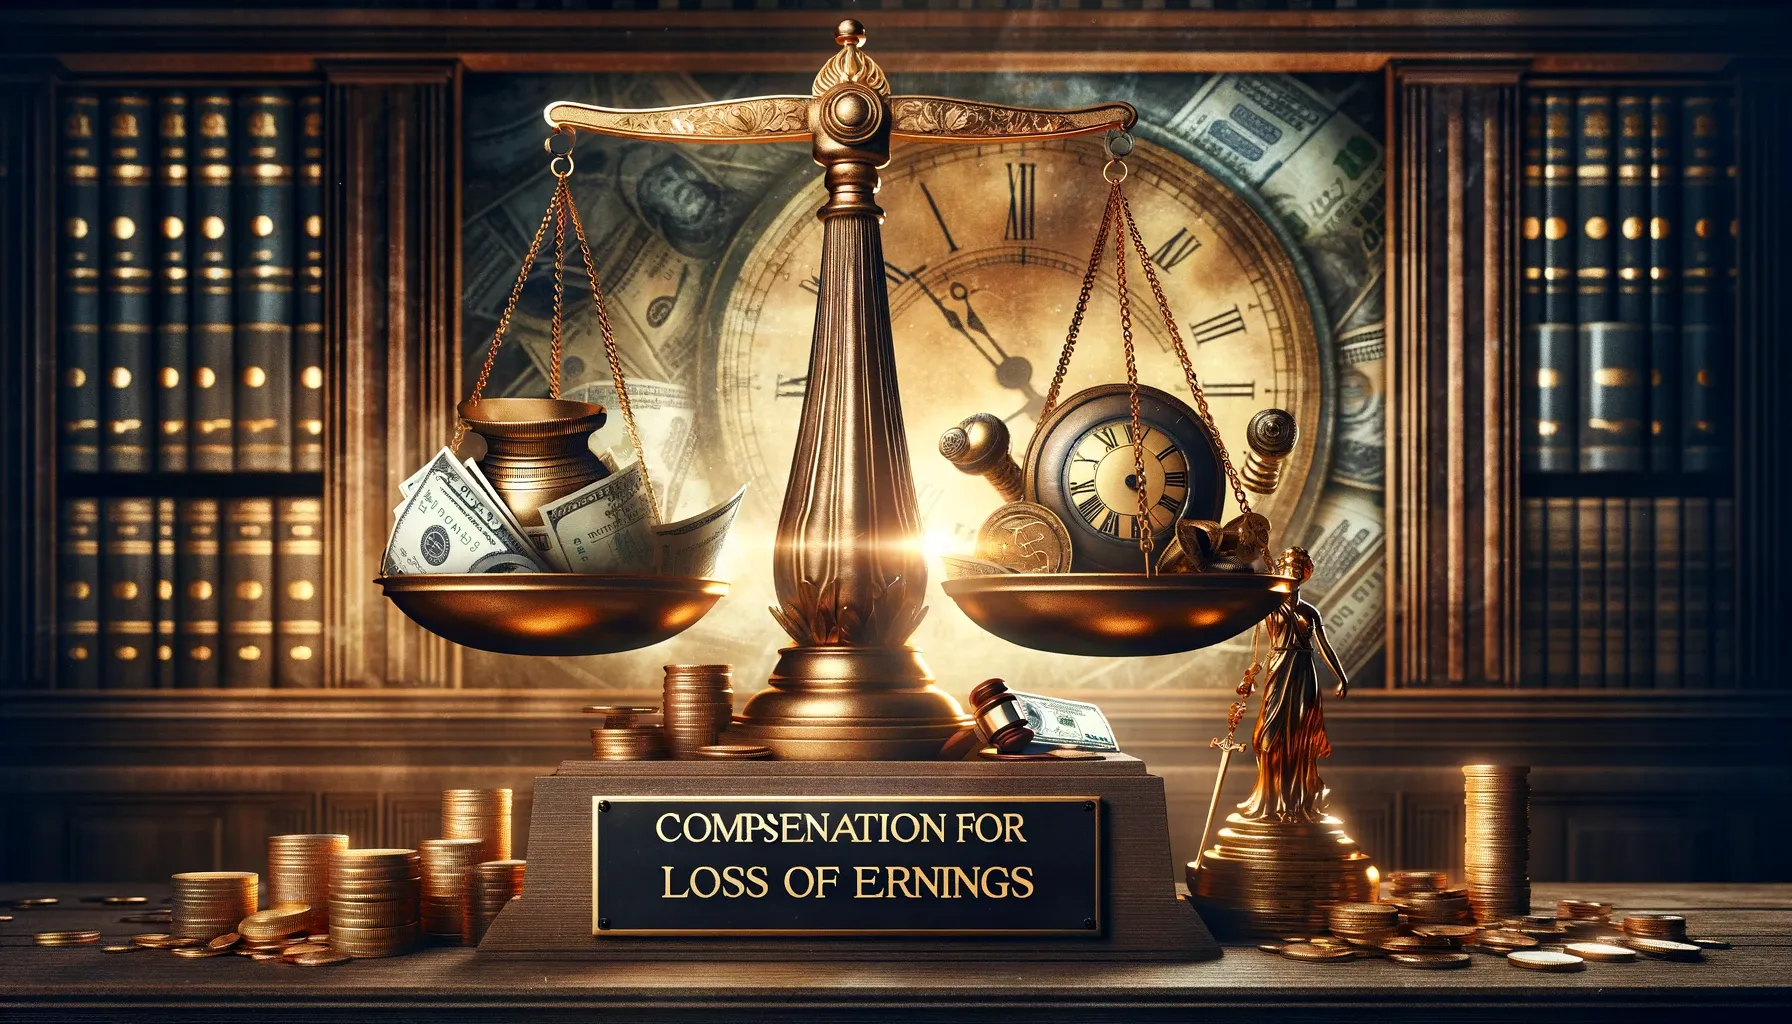 Can I claim compensation for loss of earnings?